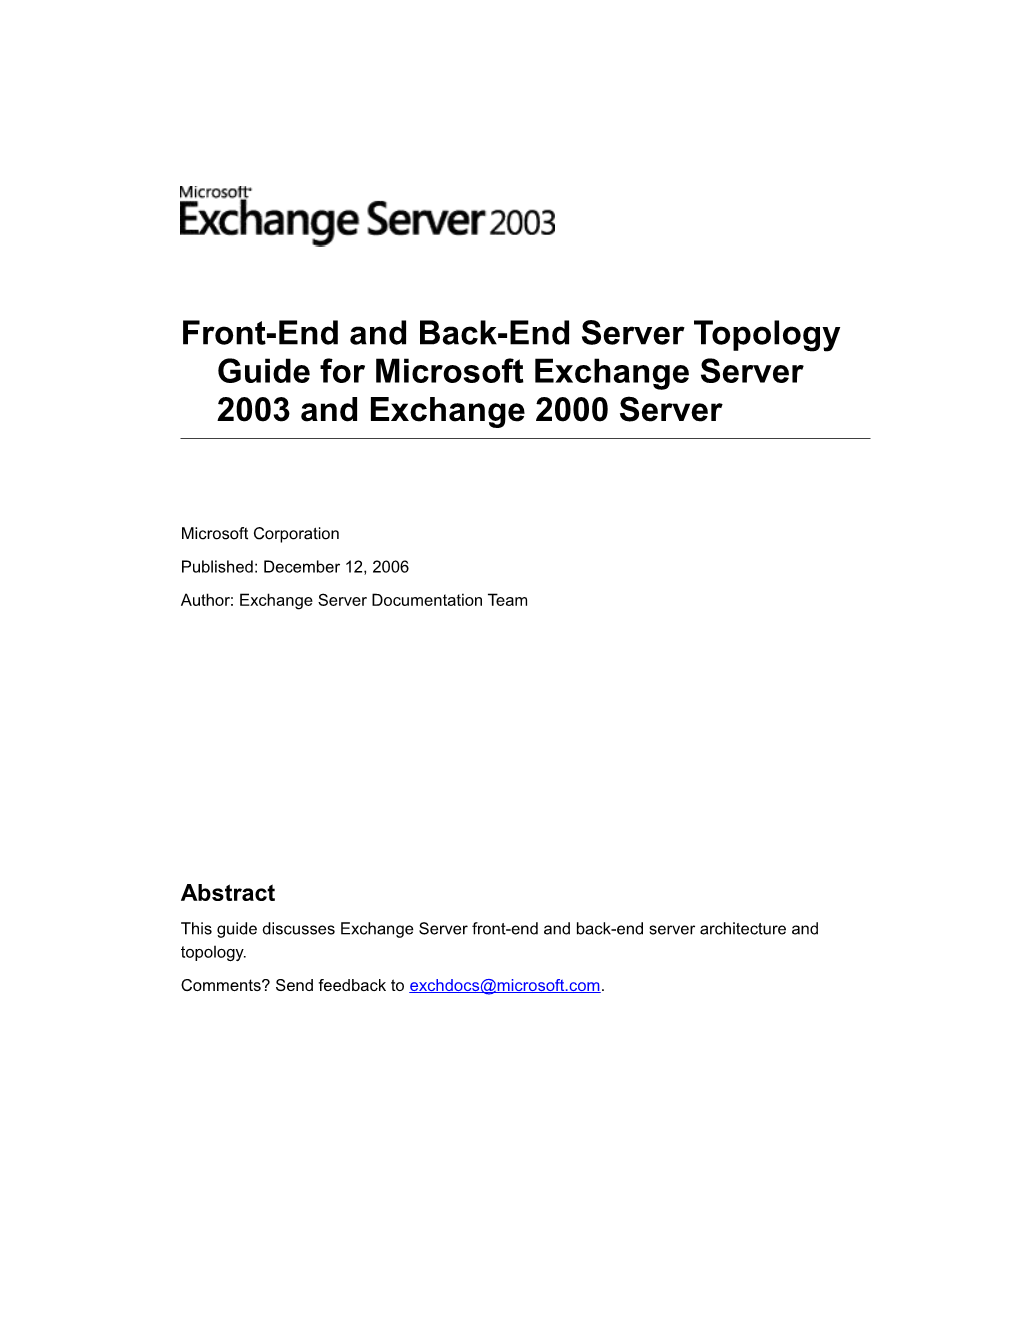 Front-End and Back-End Server Topology Guide for Microsoft Exchange Server 2003 and Exchange